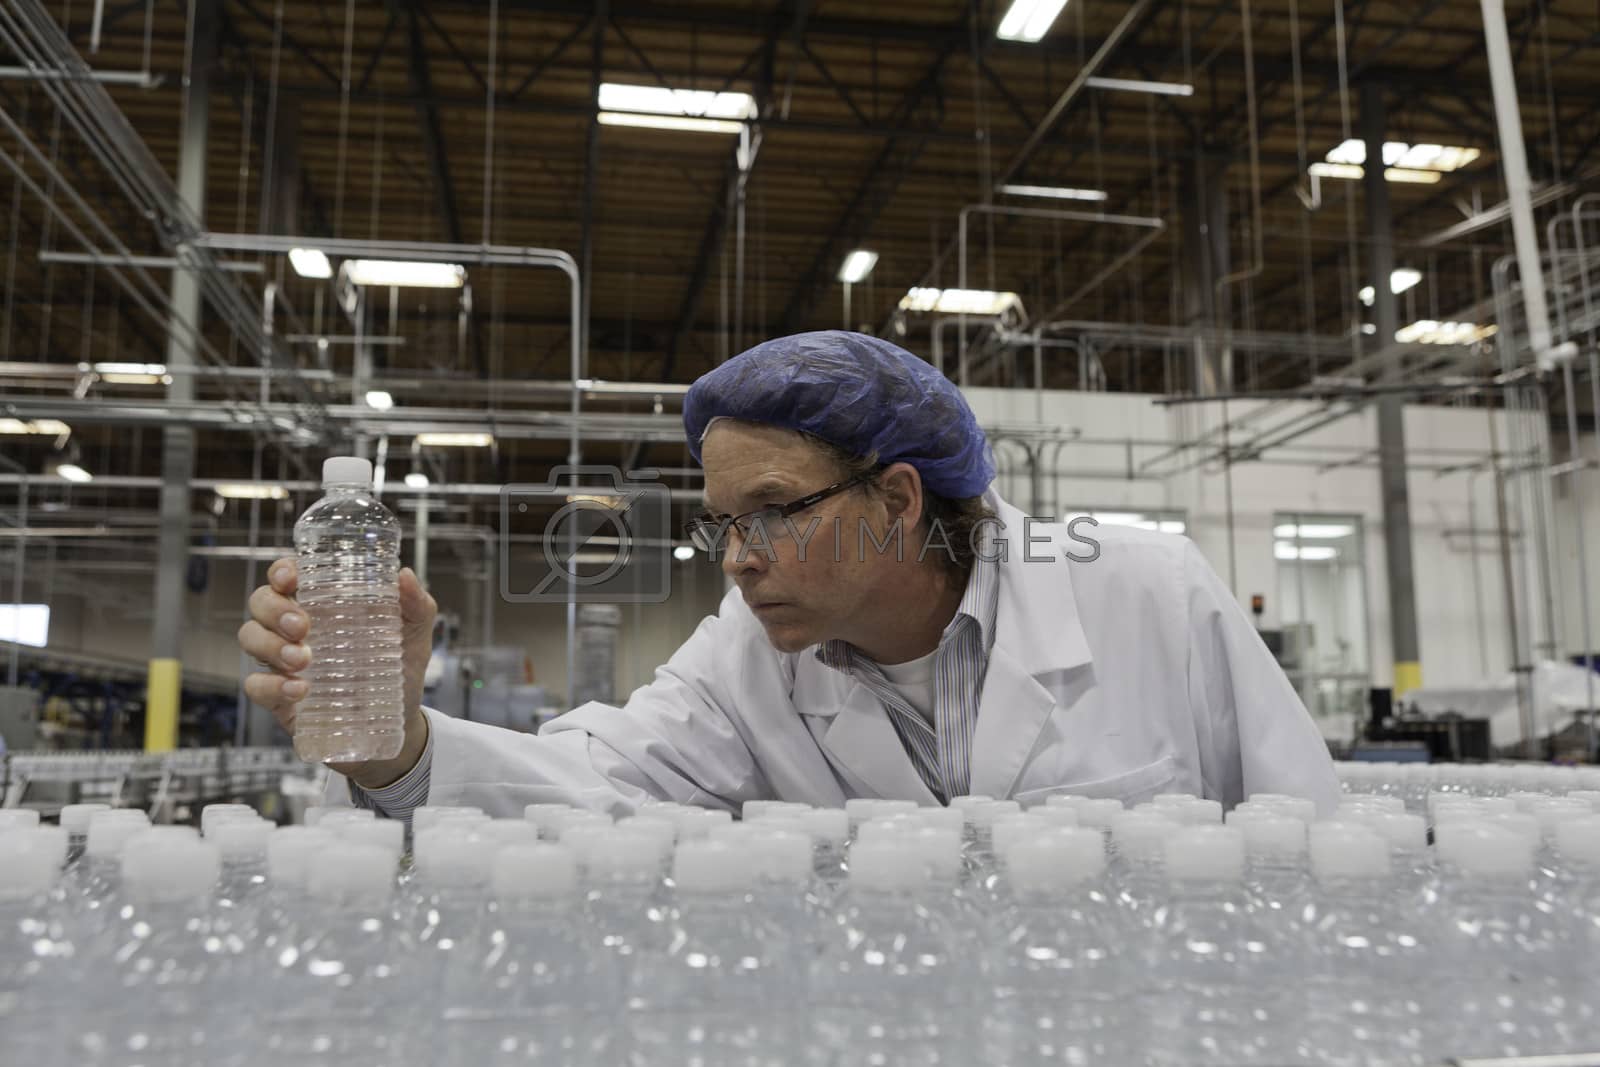 Royalty free image of Quality control worker checking bottled water at bottling plant by moodboard